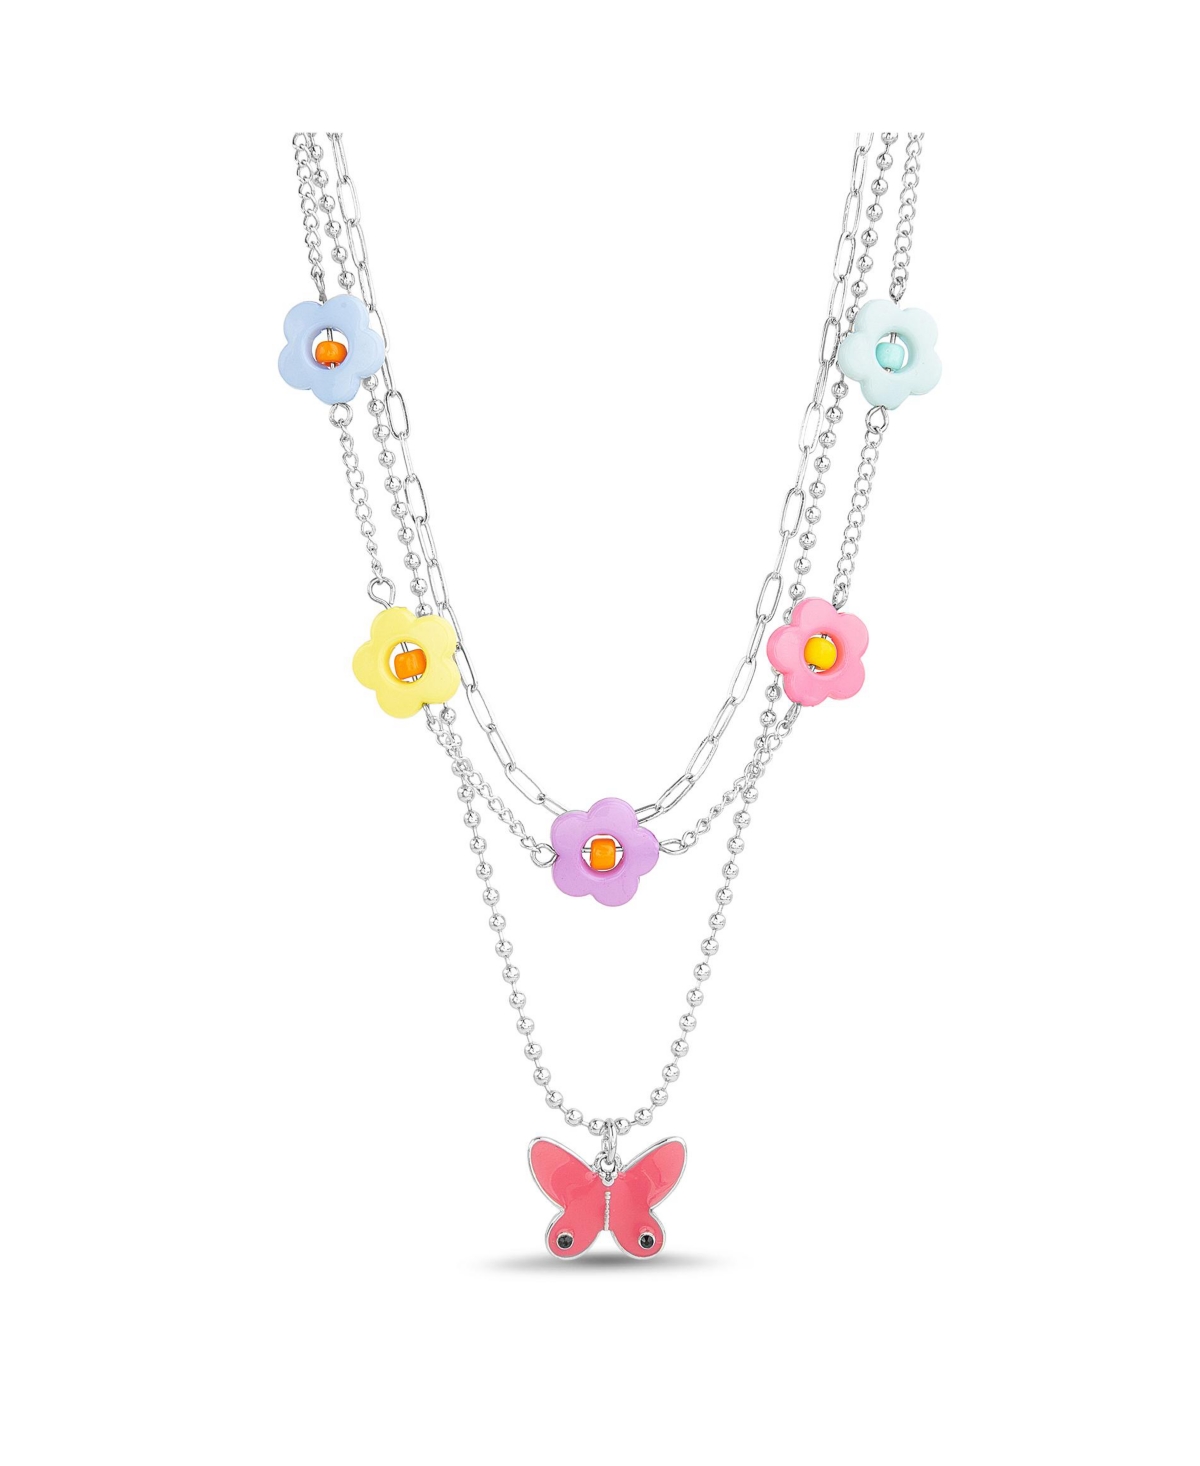 3 Piece Mixed Chain Necklace Set with Beaded Flowers and Butterfly Pendant - Multi